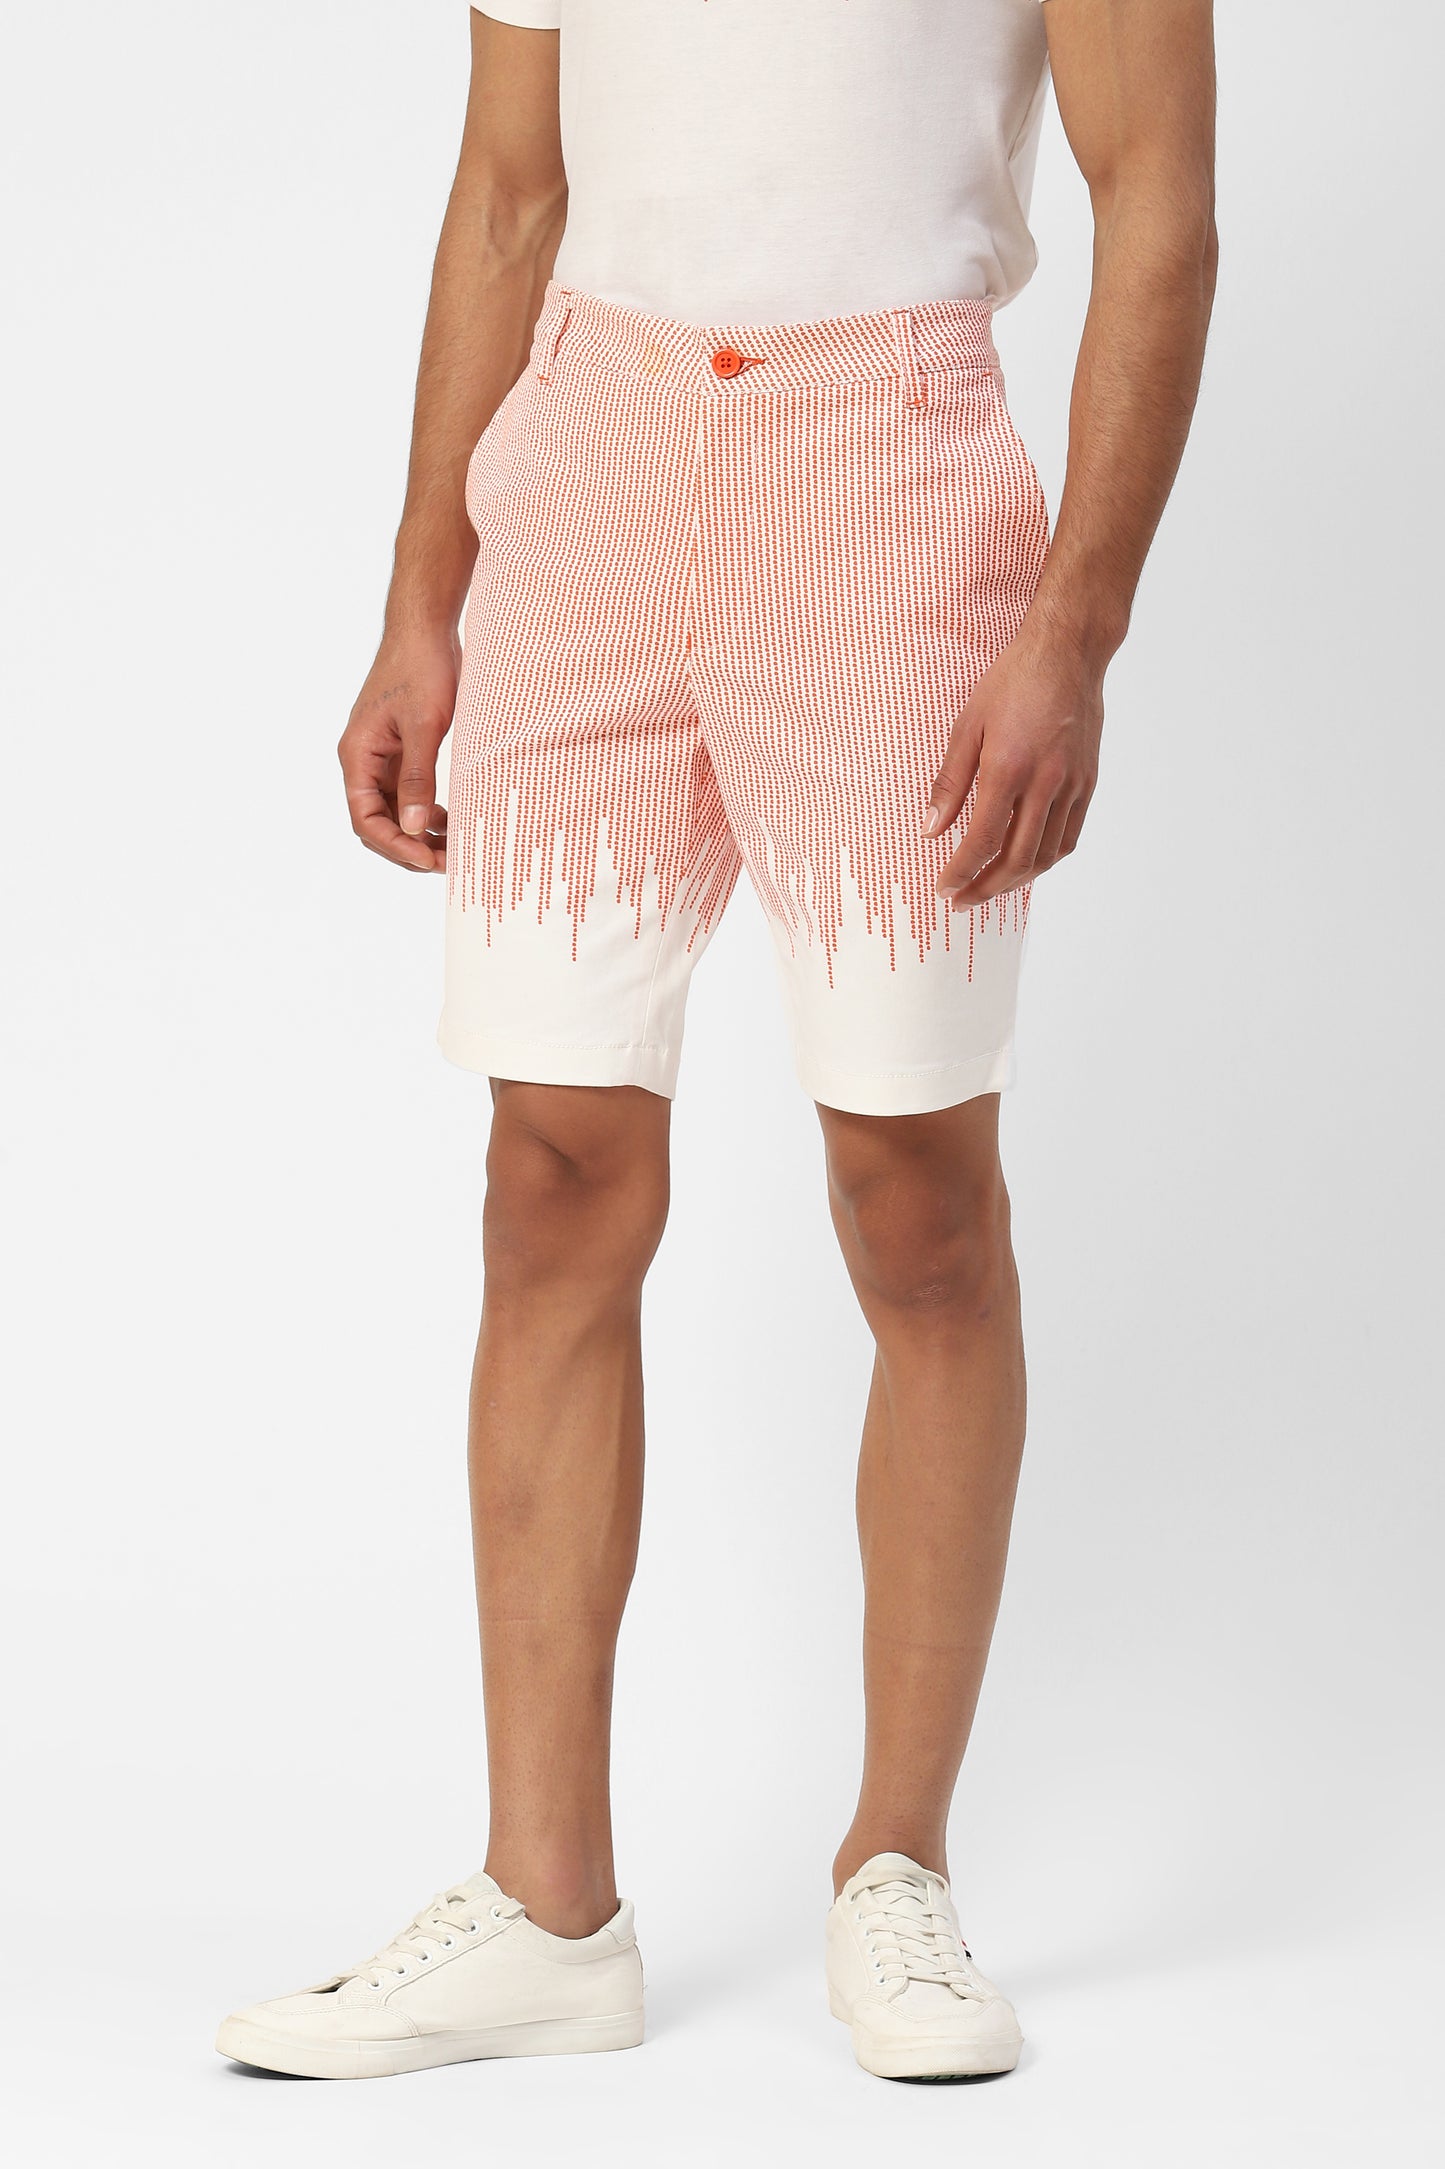 Mens White Cotton Shorts With Orange Dotted Print